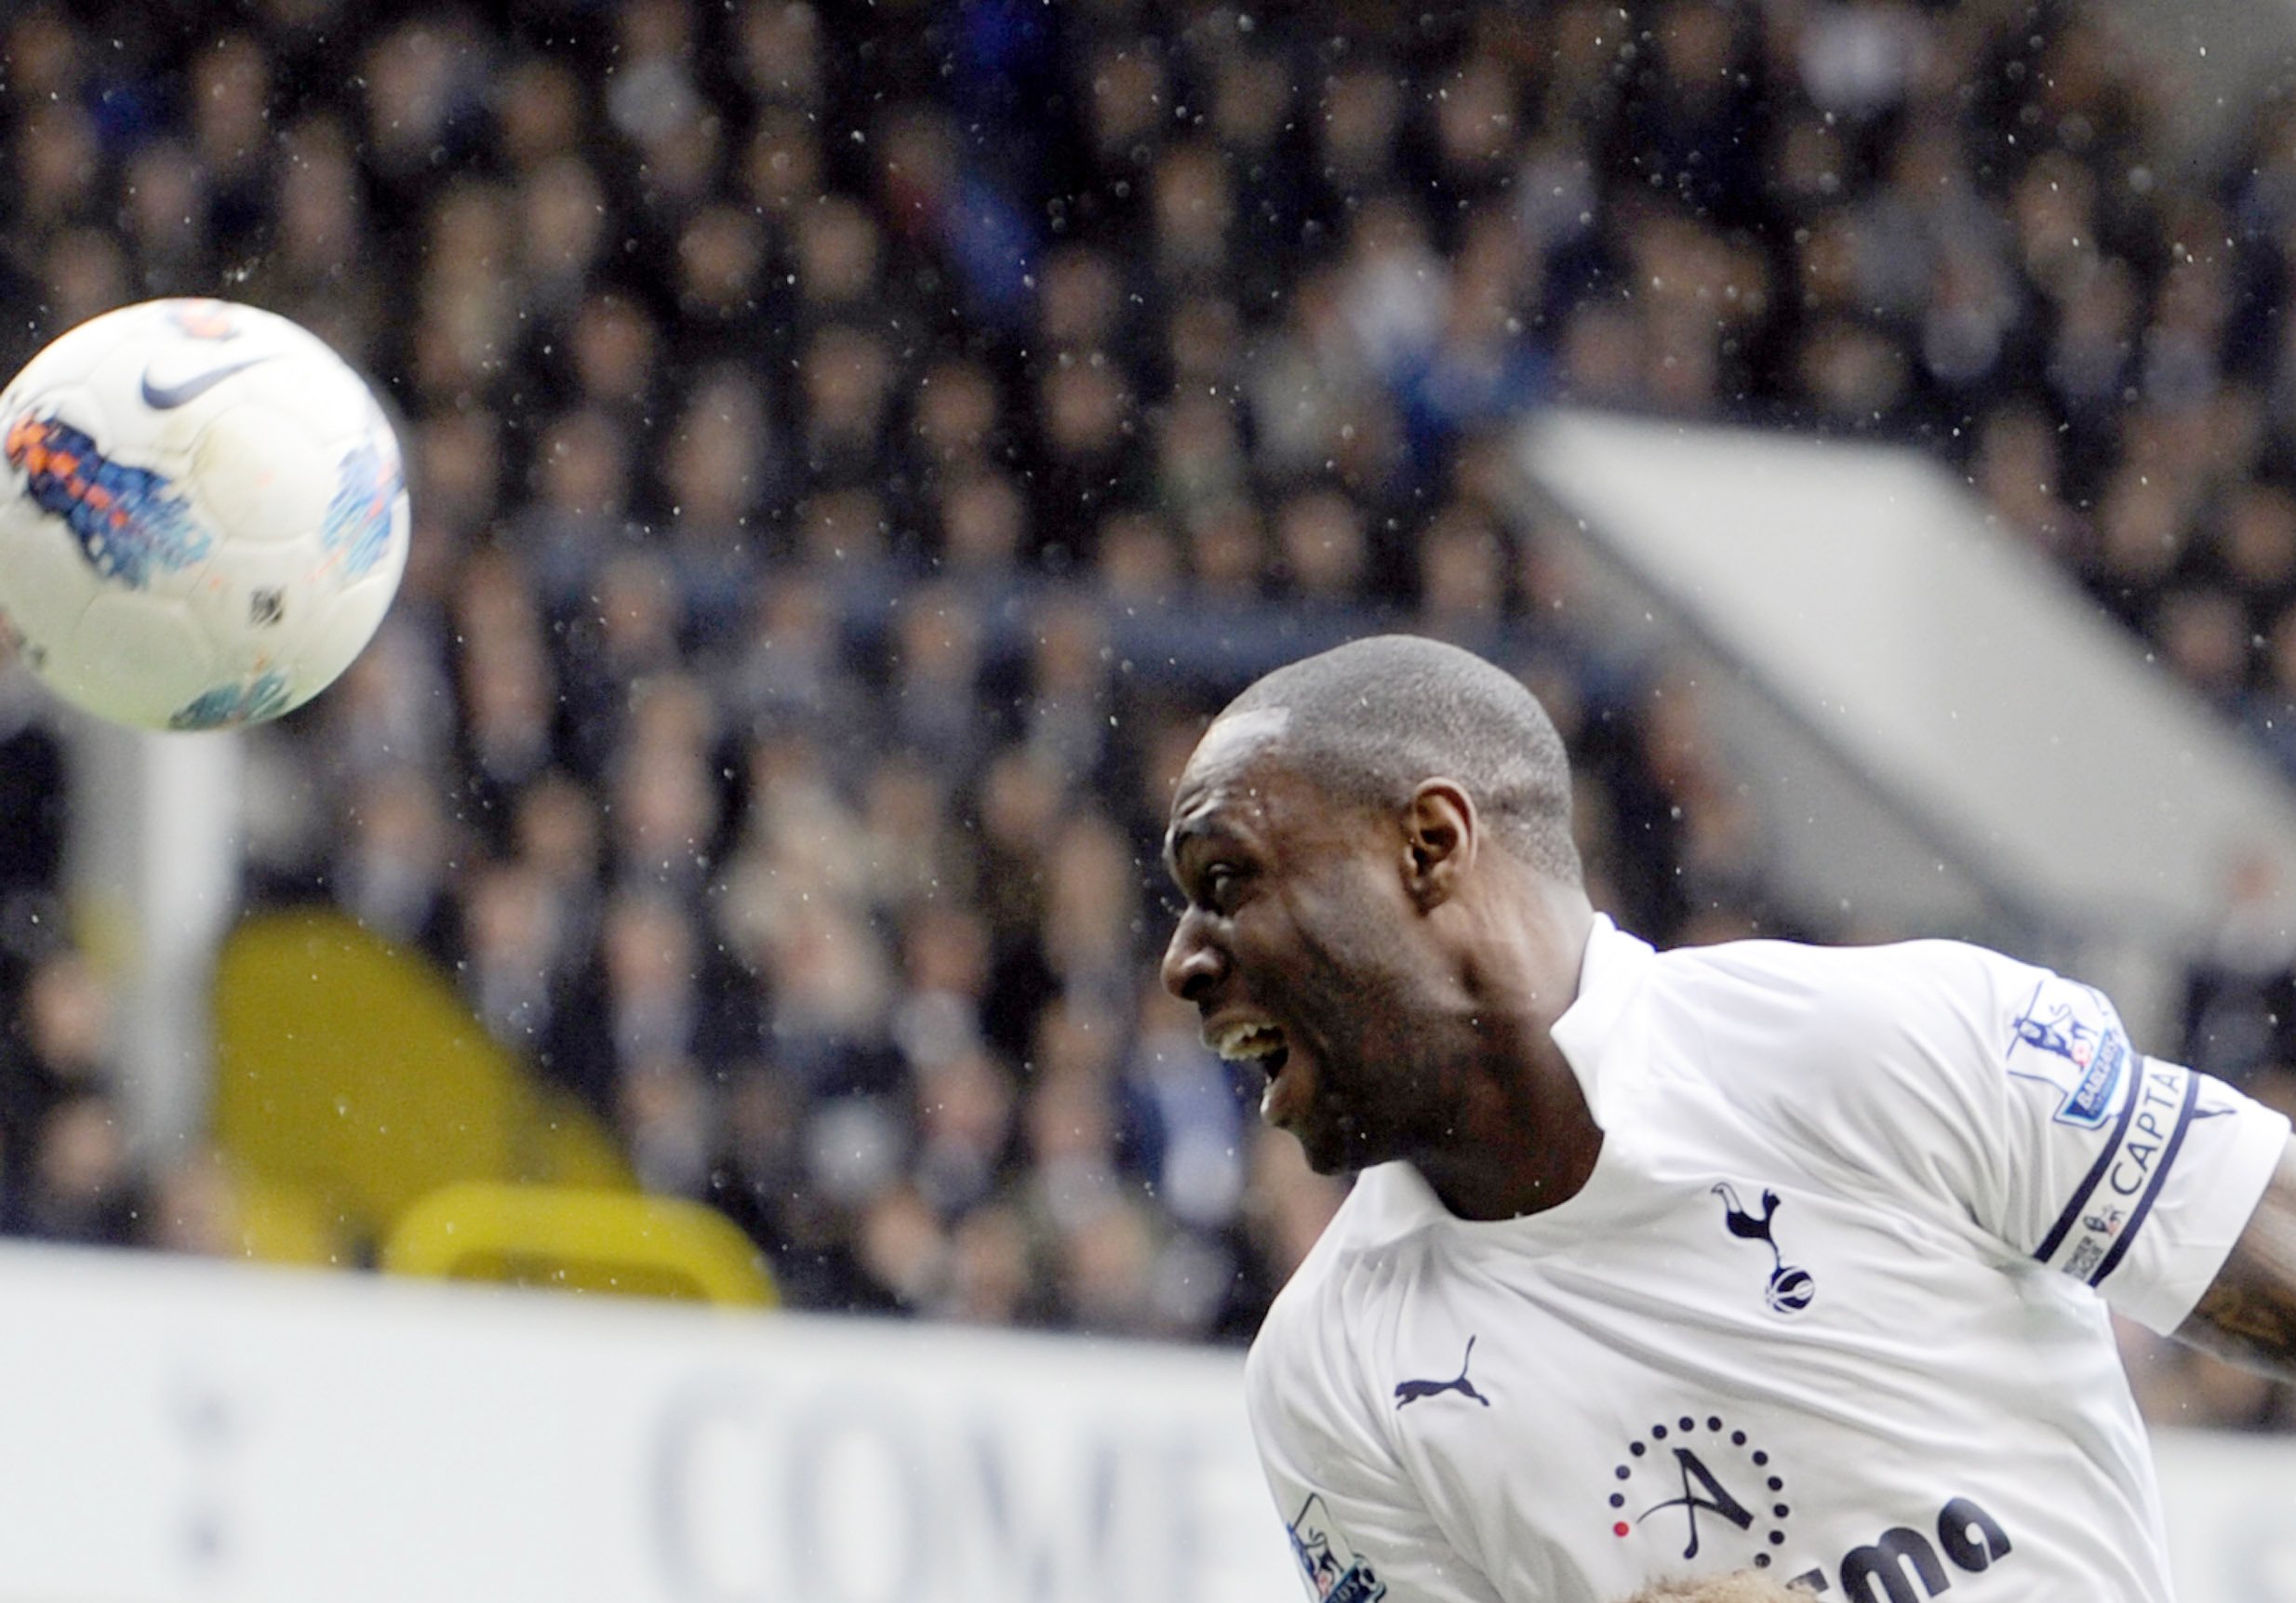 Ledley King reveals when he had to step up for Tottenham Hotspur.